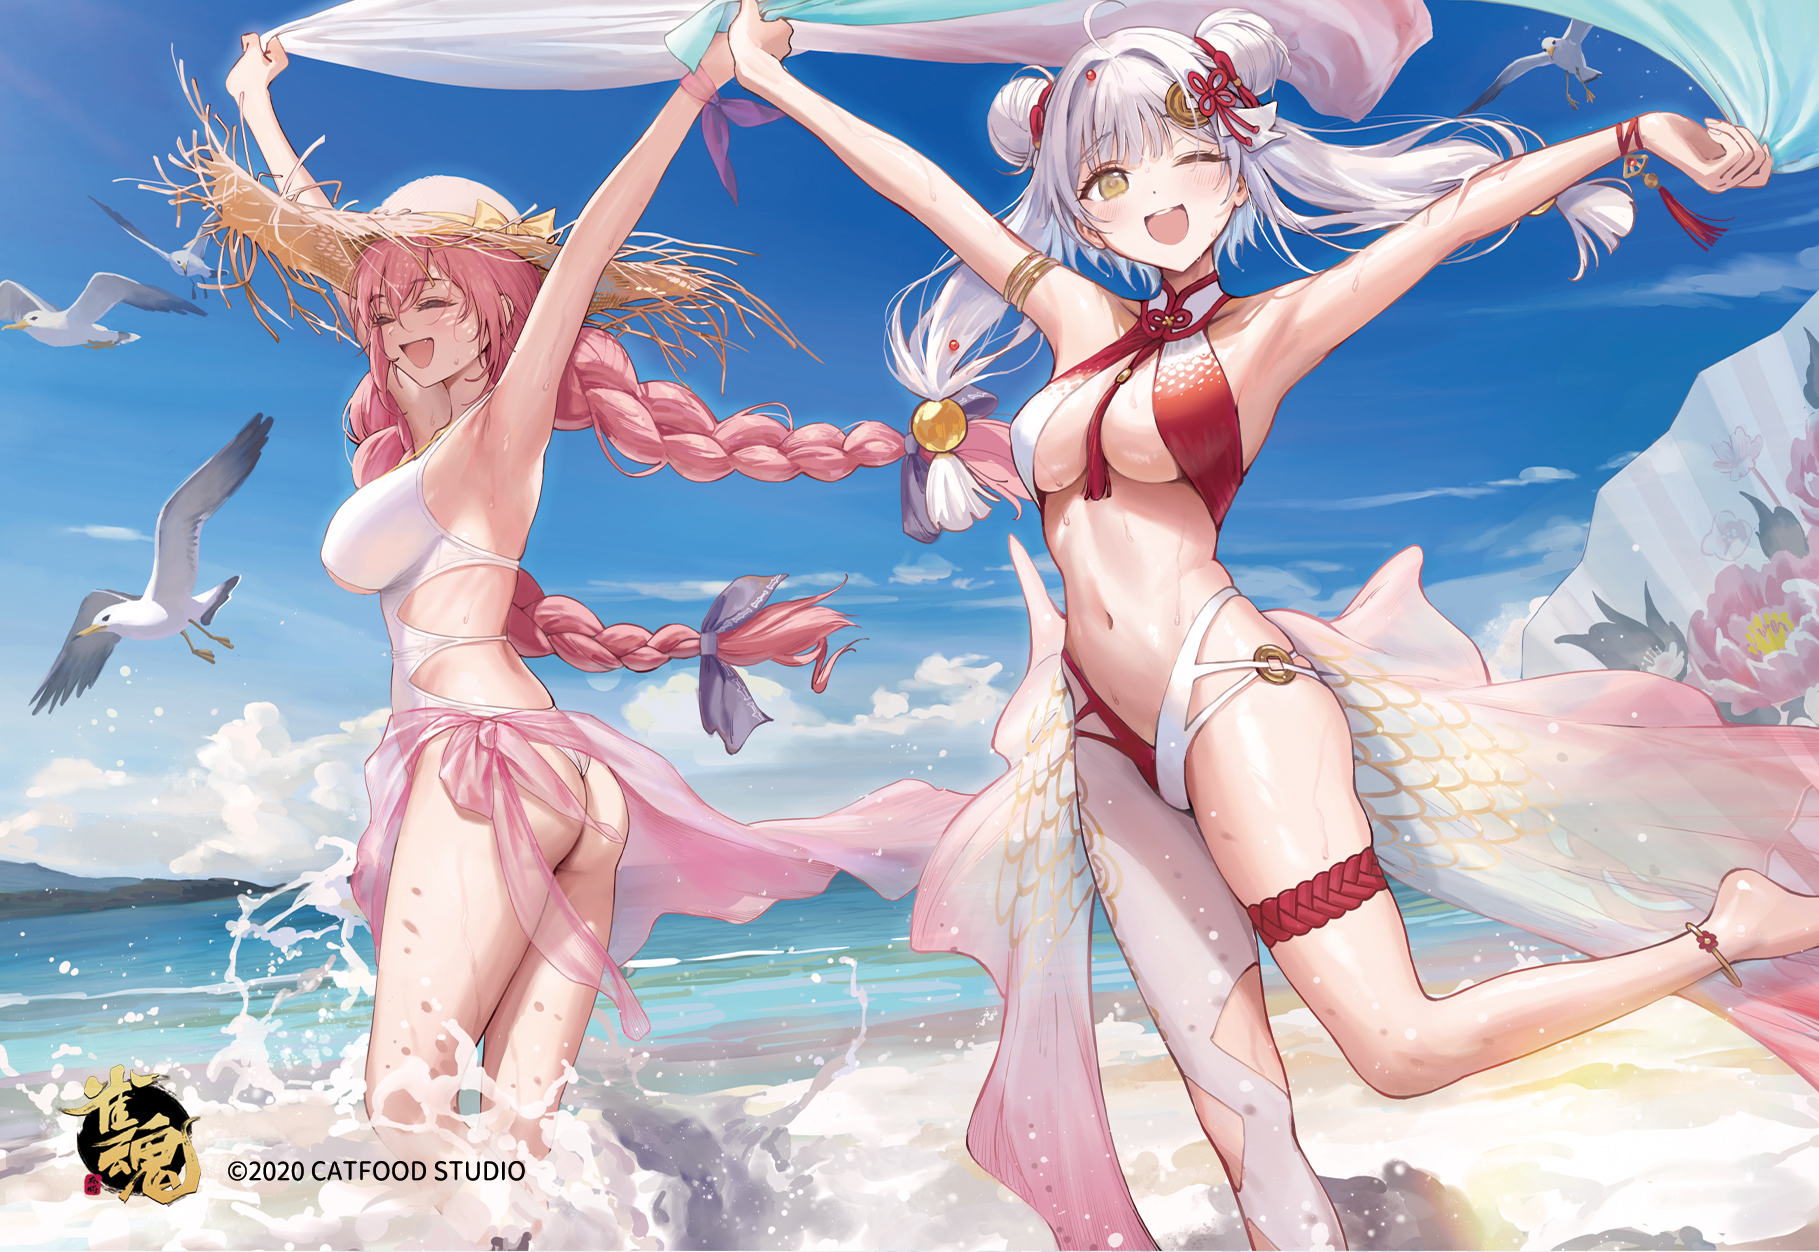 Anime 1819x1252 Mahjong Soul swimwear anime girls two women Fujita Kana (Mahjong Soul) Fu Ji (Mahjong Soul) sky beach looking at viewer one eye closed wink closed eyes straw hat Ame women on beach women outdoors birds big boobs water drops arms up holding hands one-piece swimsuit wet bikini sweaty body running horizon armpits twintails odango hairbun water clouds watermarked